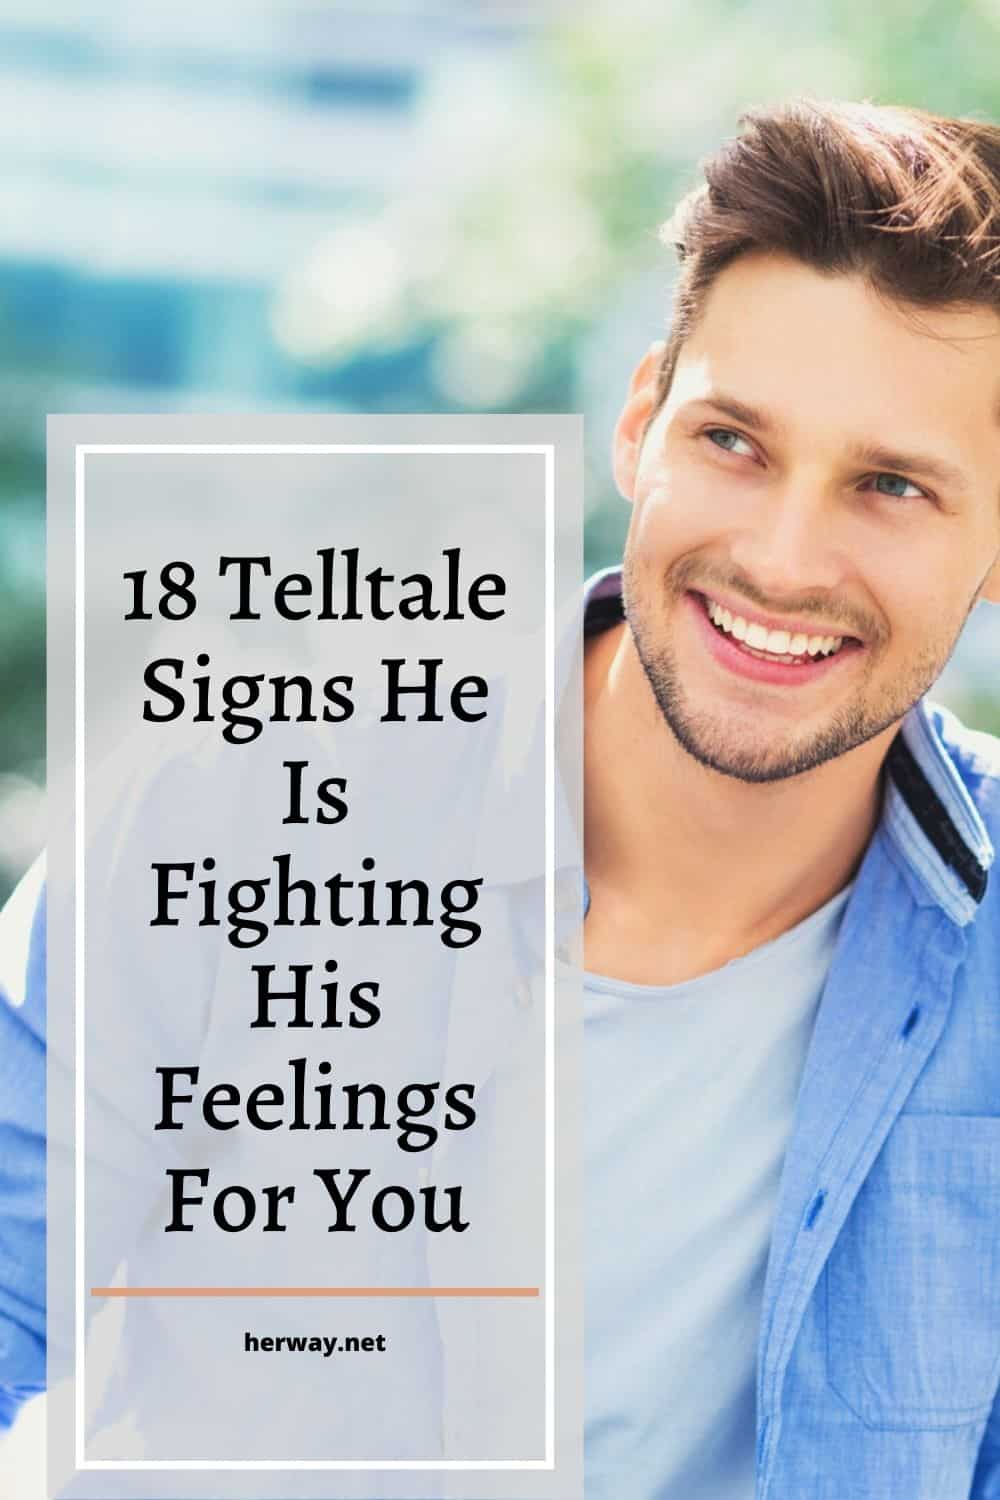 18 Telltale Signs He Is Fighting His Feelings For You